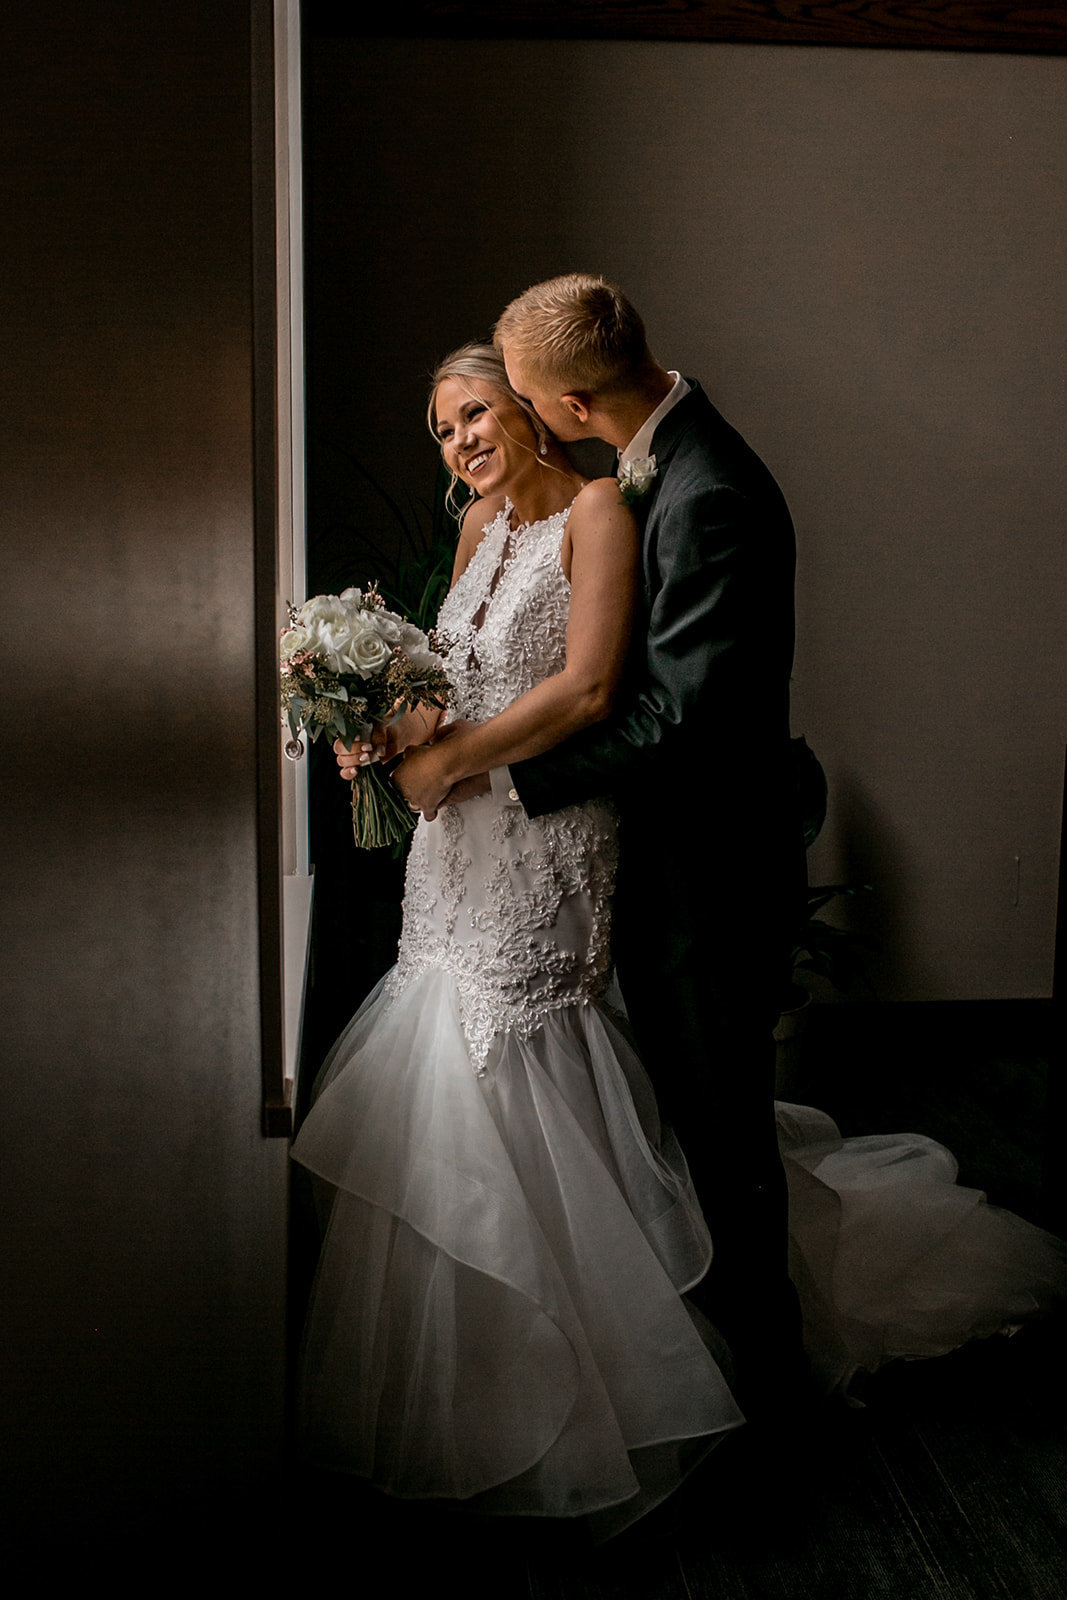 Des Moines Iowa wedding couple cuddling by the window.